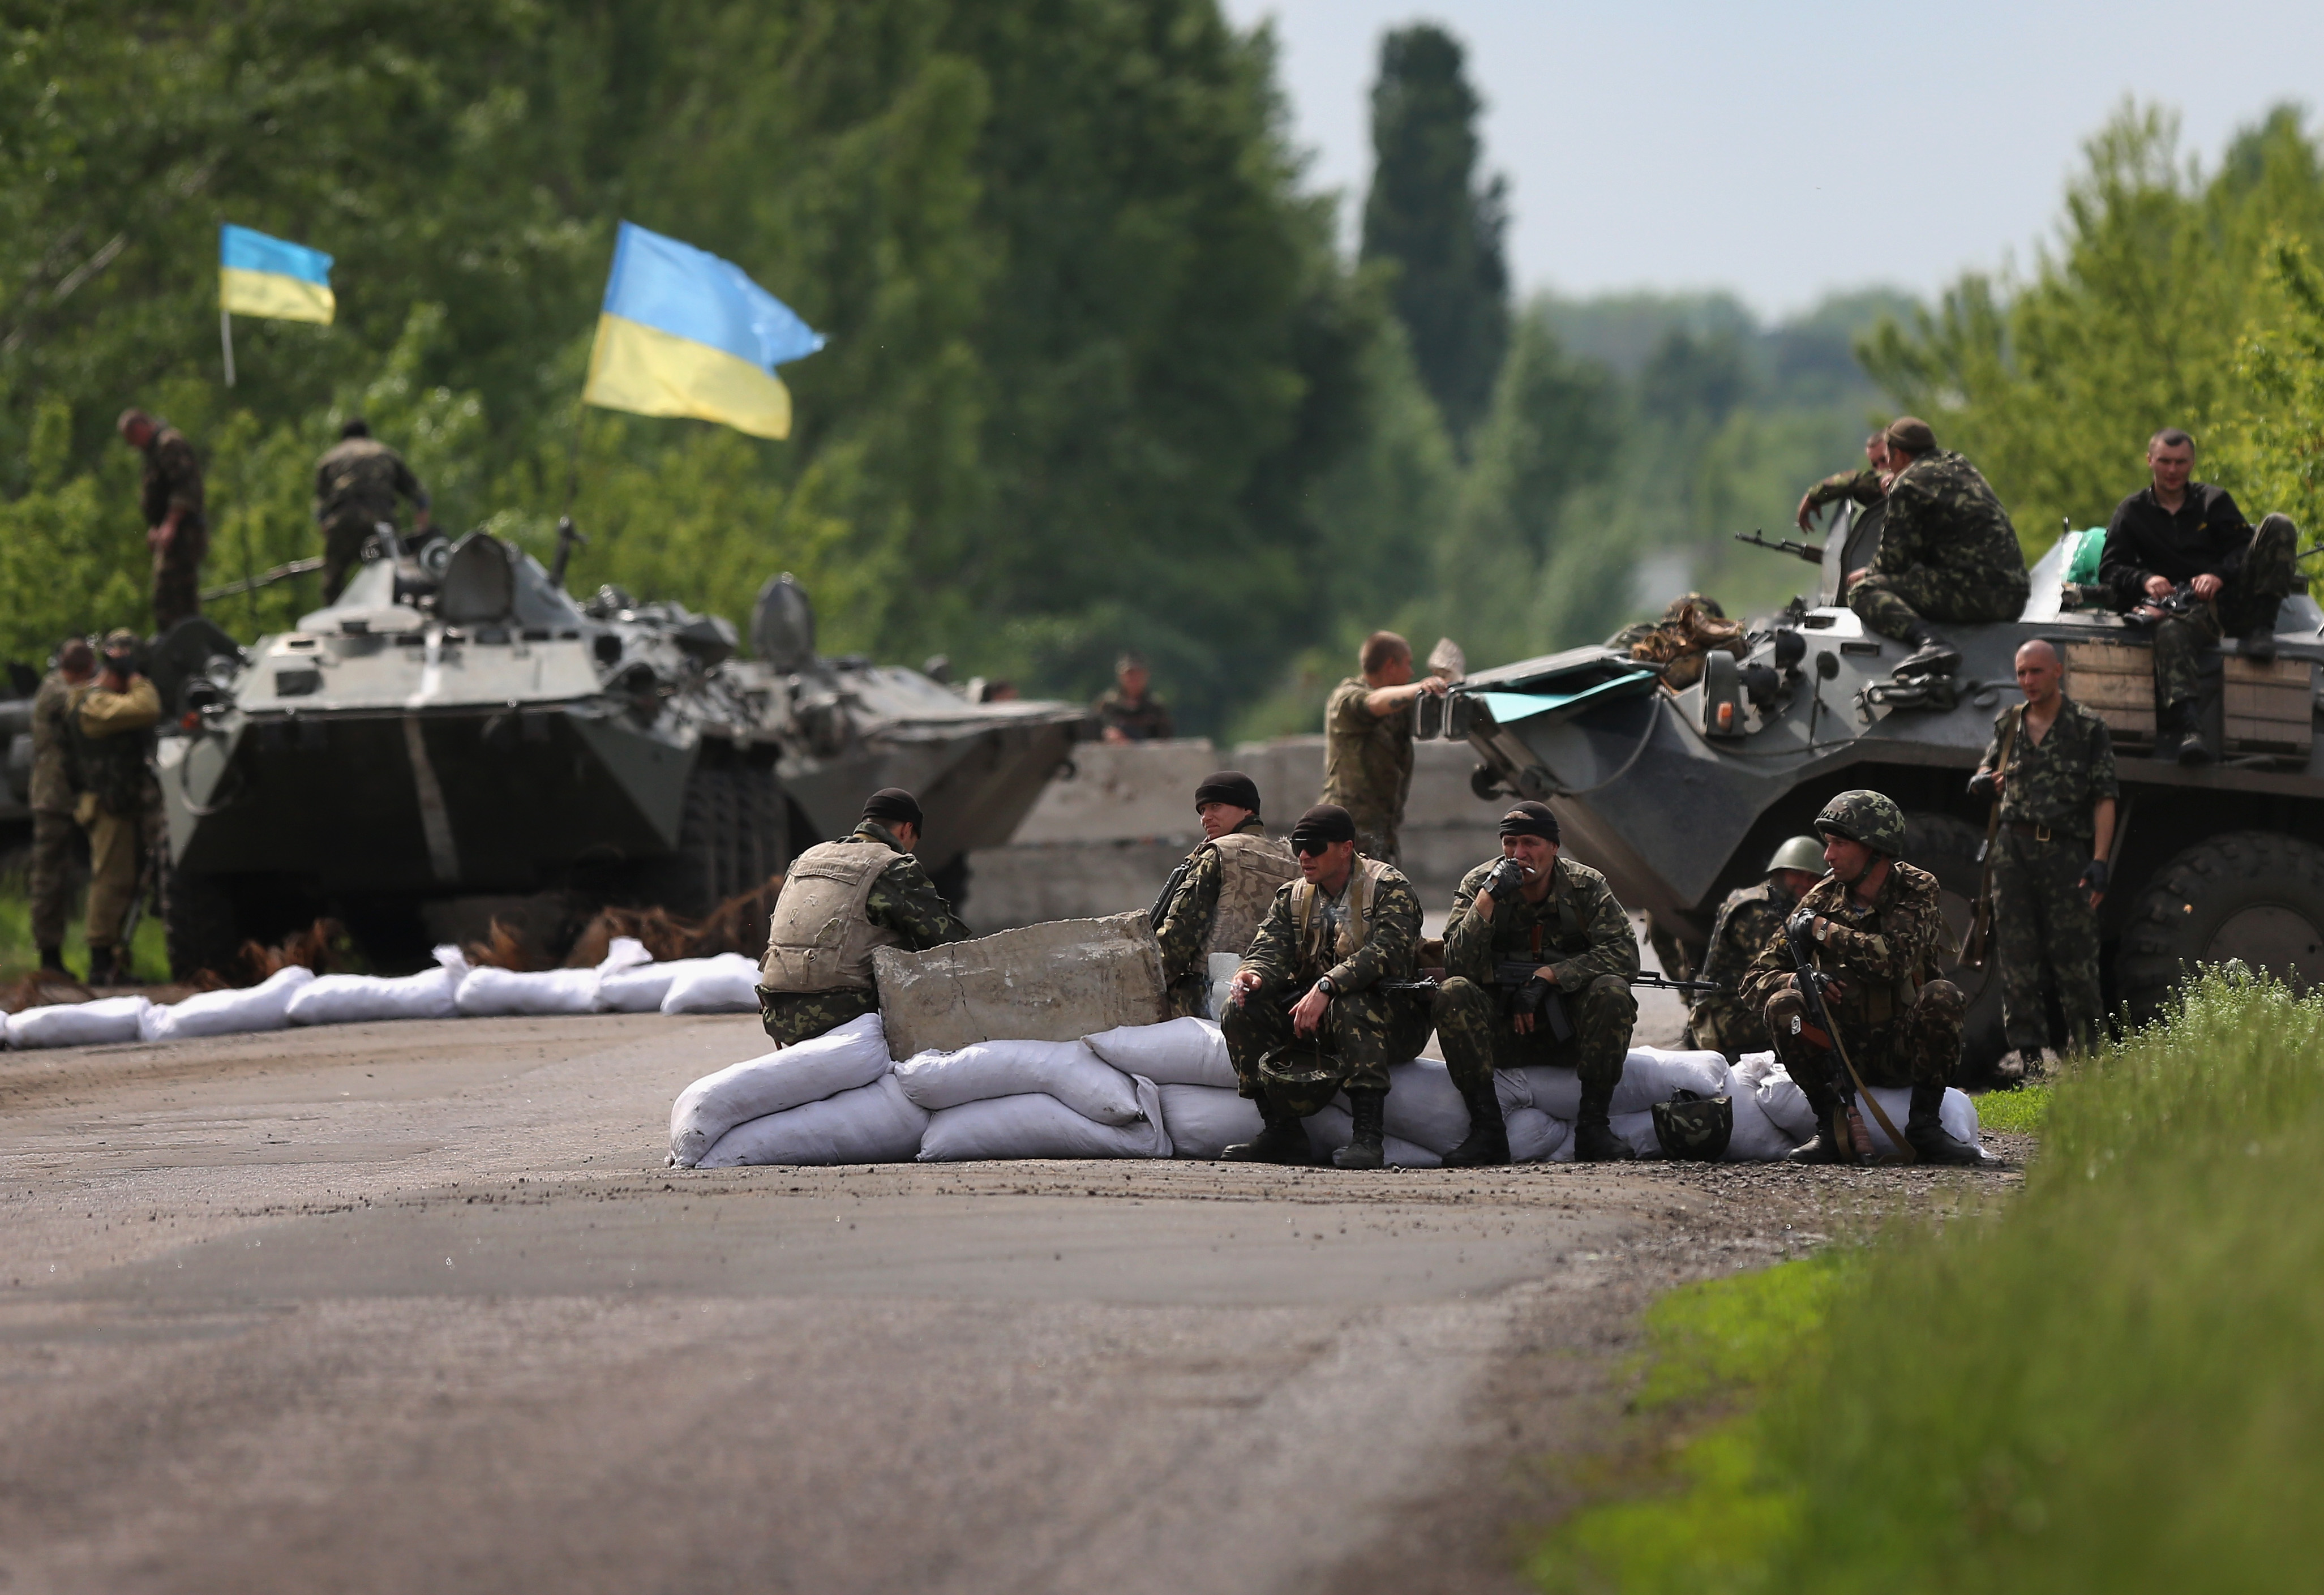 Ukranian military soldiers man a highway checkpoint on May 13, 2014 near Slovyansk, Ukraine. At least 6 Ukranian soldiers were killed and more were reportedly injured by pro-Russian separatists in the nearby city of Kramatorsk. (John Moore—Getty Images)